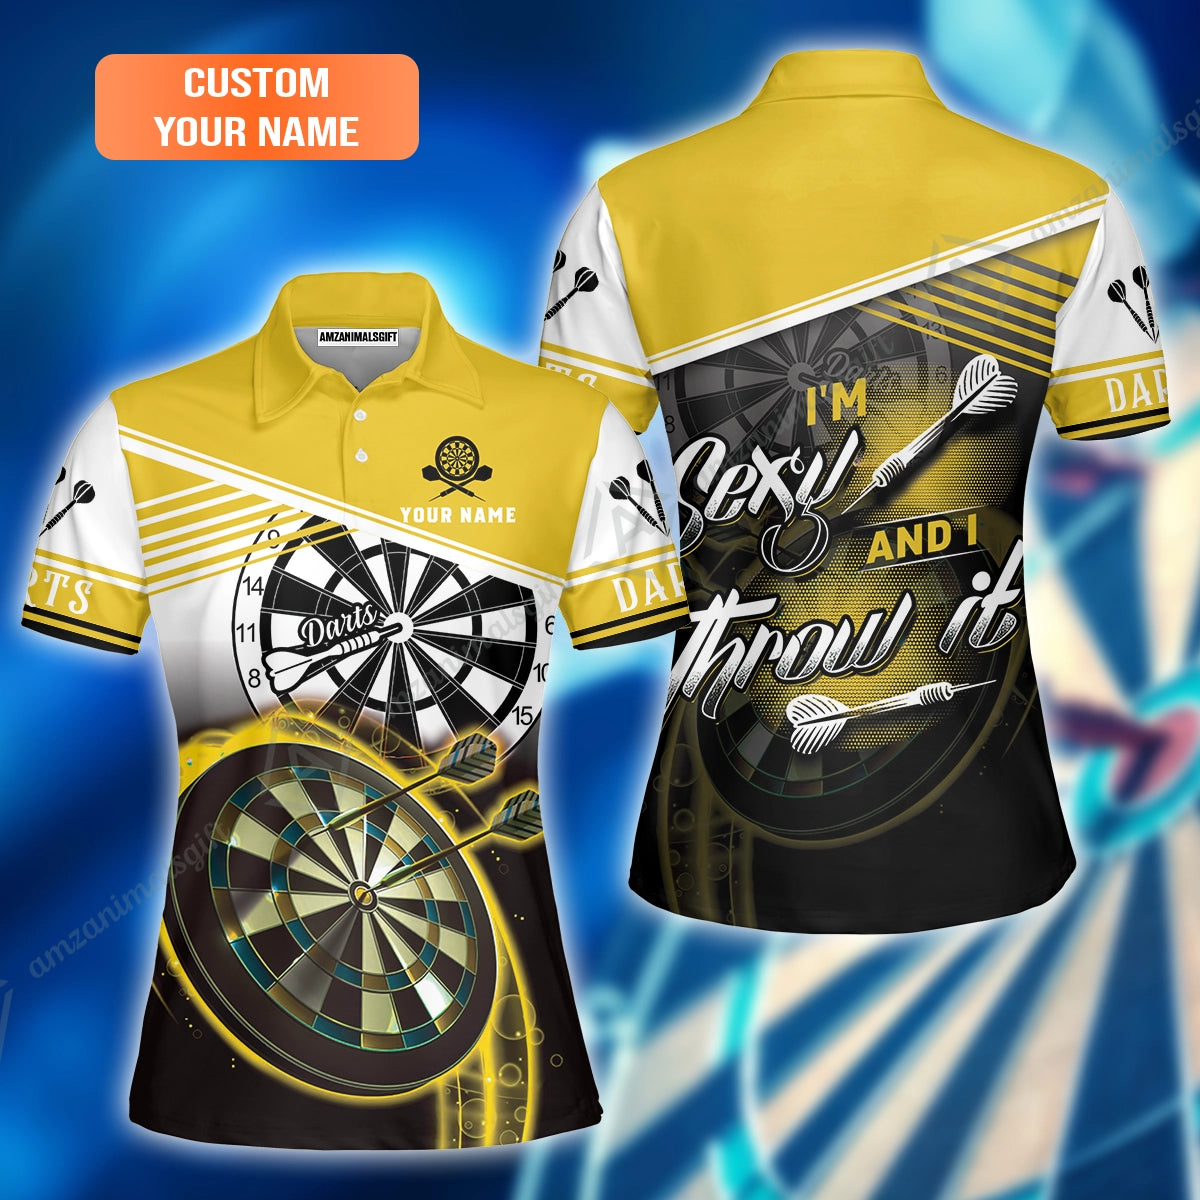 Personalized Darts Women Polo Shirt, Darts Yellow Color Custom Polo Shirt I'm Sexy And I Throw It, Outfits For Darts Players, Darts Team